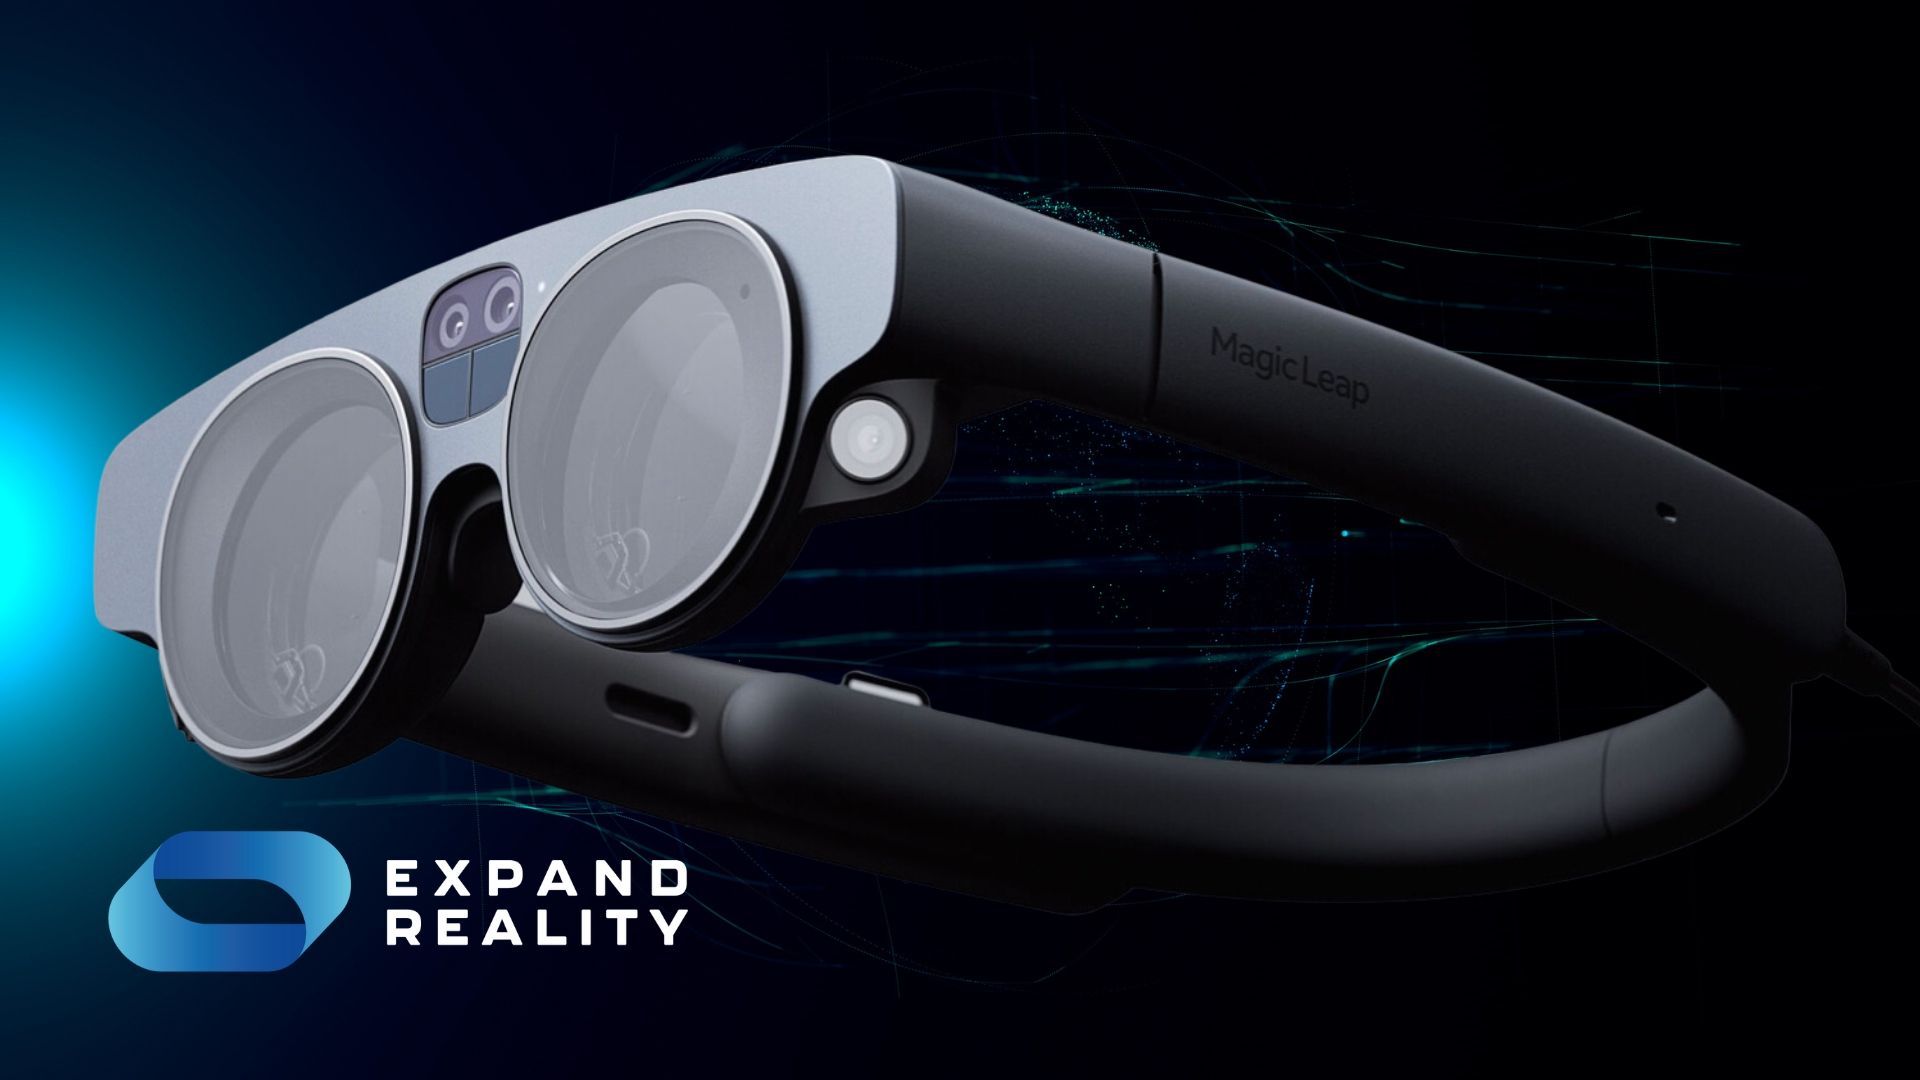 Magic Leap 2 is an XR device built for enterprise. Learn about its latest upgrades, including the launch of its AR Cloud and brand new native browser.